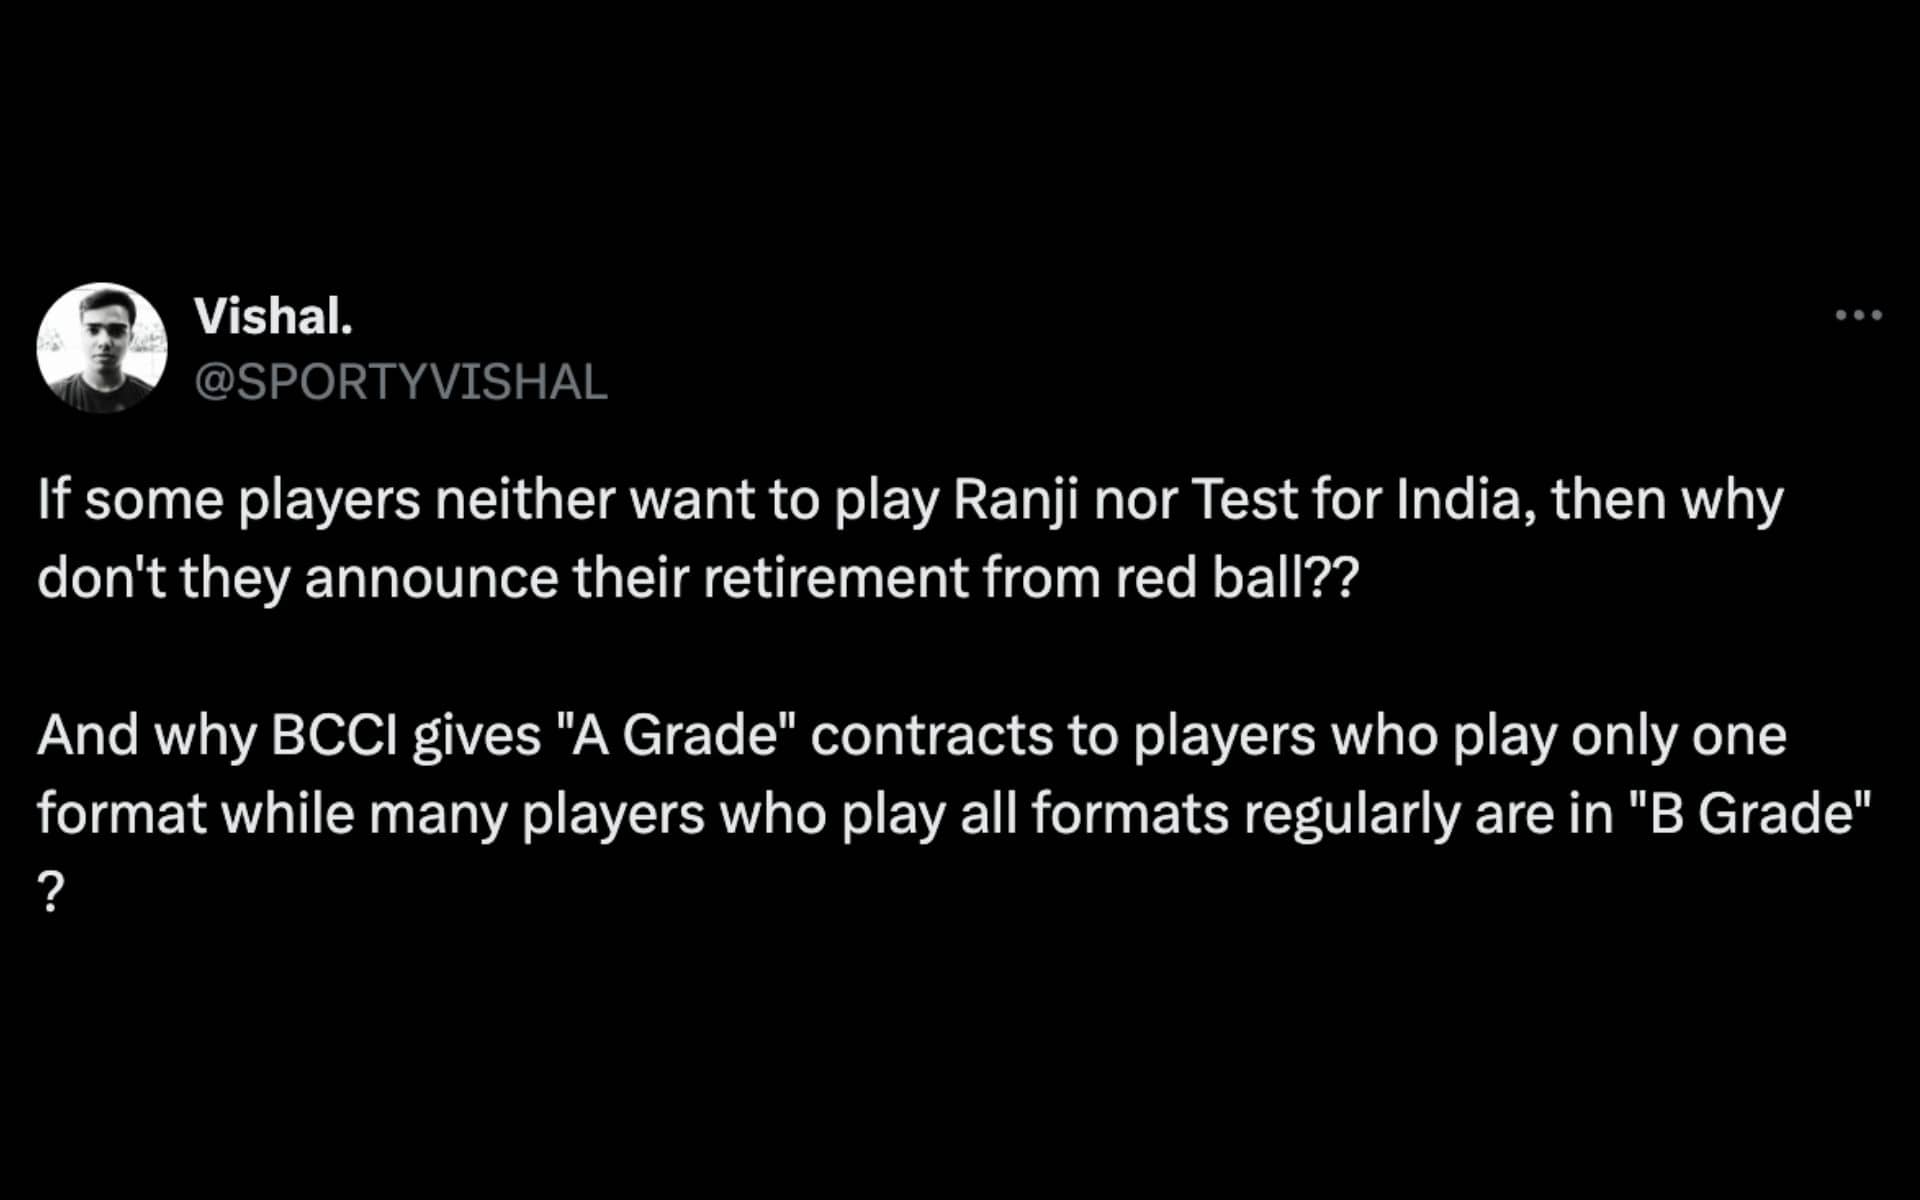 An user asking on what basis BCCI choose Grades for contracts  